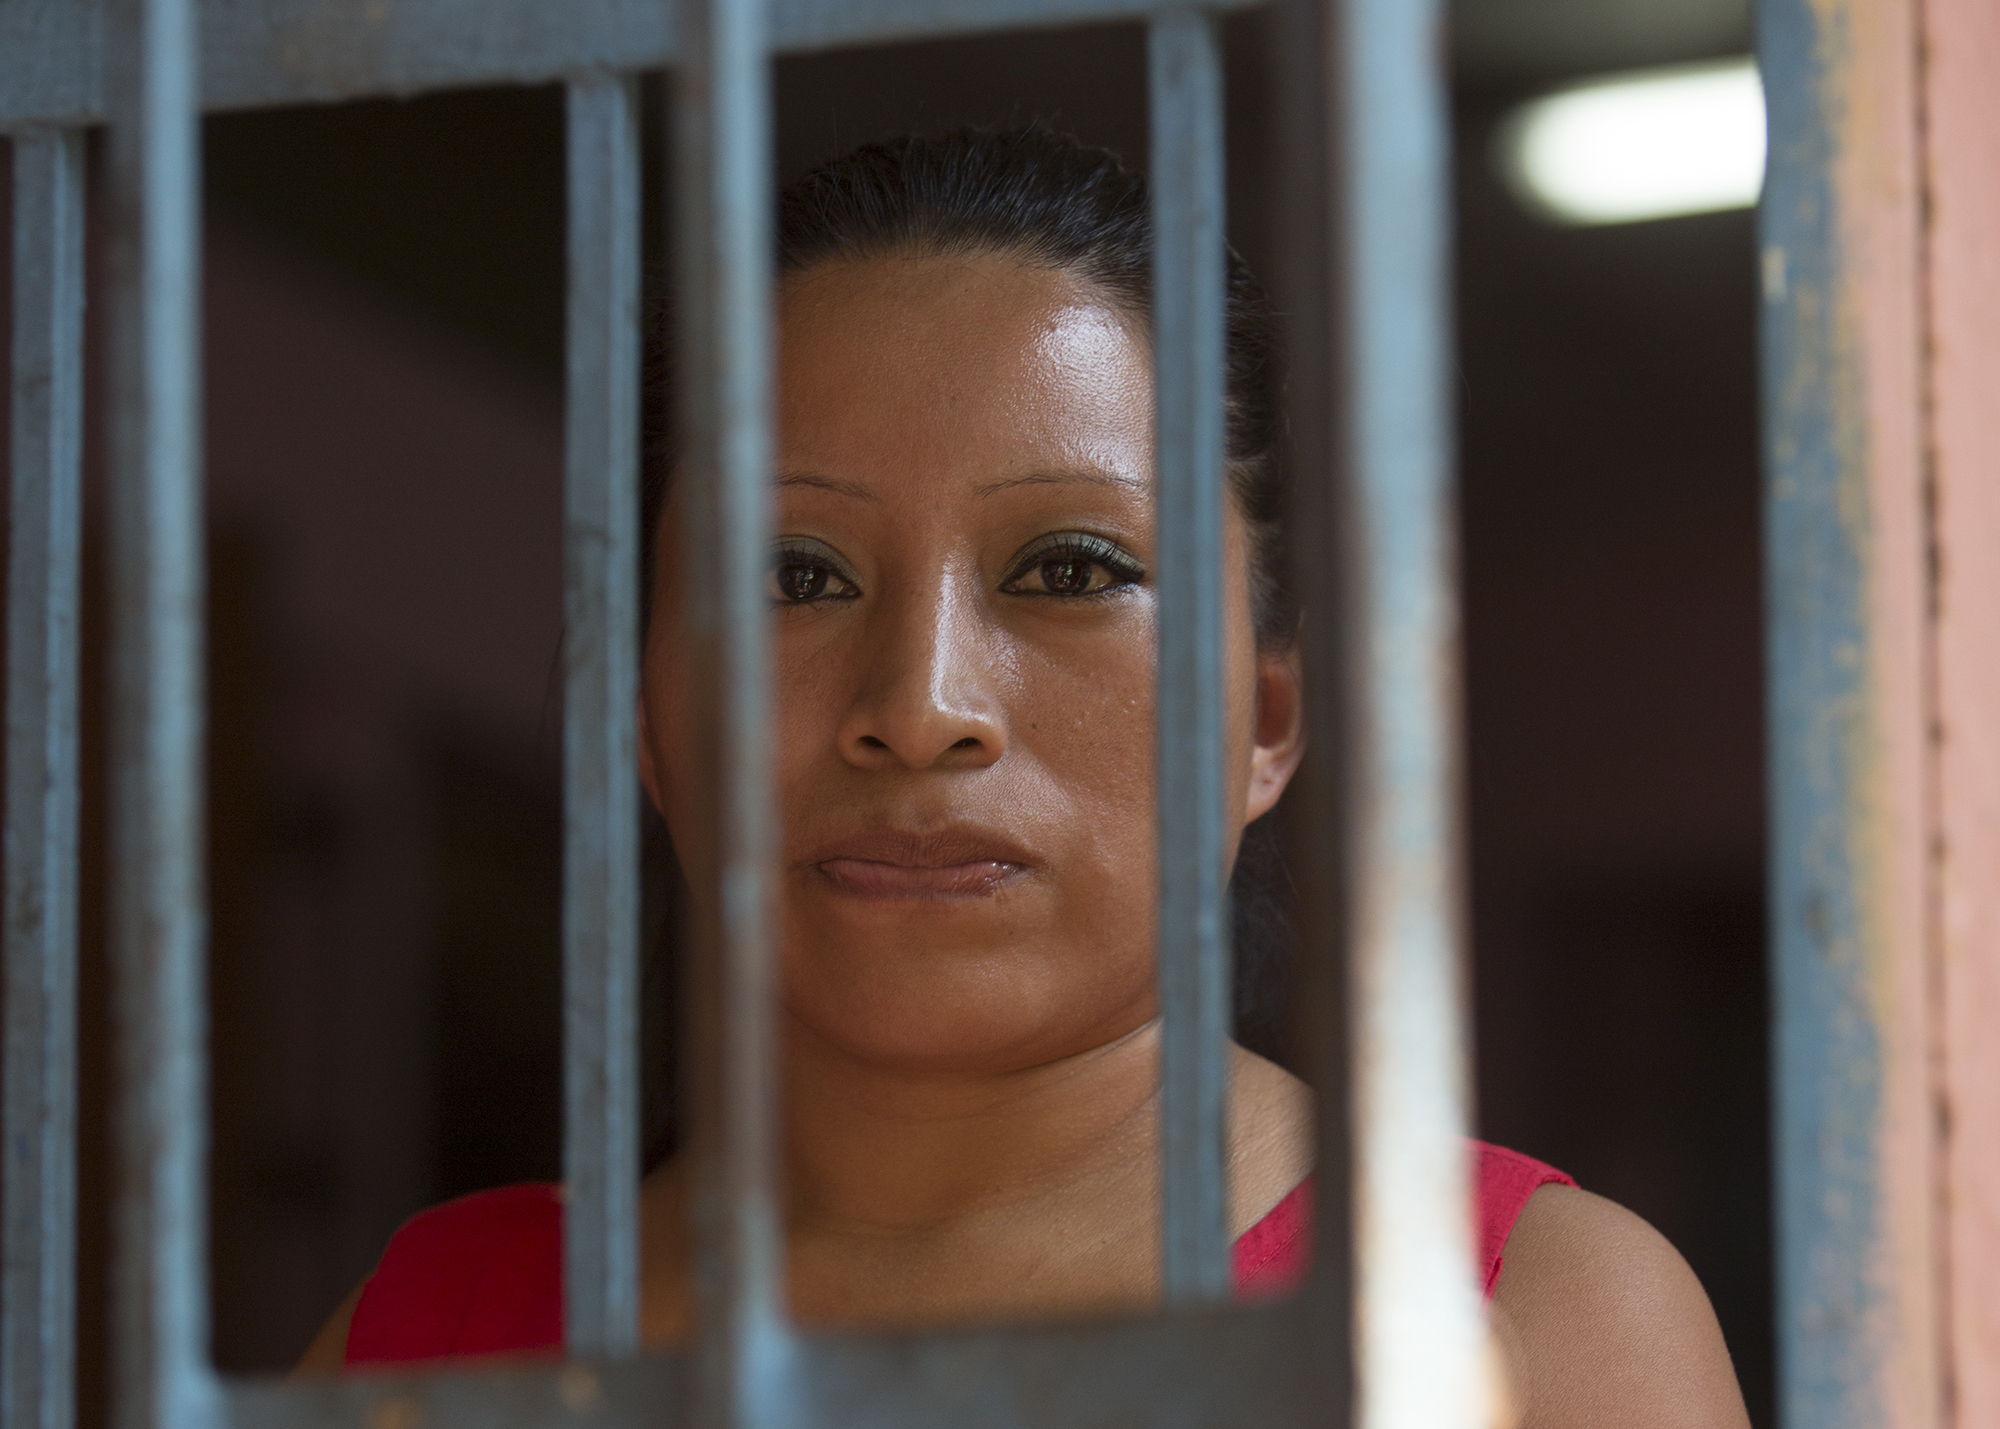 Portrait of Teodora Vasquez at her prison in El Salvador. She had been sentenced for 30 years after having an stillbirth out of suspicions of having had an abortion. In 2008, Teodora del Carmen Vásquez was sentenced to 30 years in prison for “aggravated homicide” after suffering a still-birth at work. Teodora, mother of an 11-year-old boy, was expecting a new baby when she started experiencing increasingly severe pain. She called the emergency services but her waters broke soon afterwards. She went into labour, and was unconscious when she gave birth. When she came round, bleeding profusely, her baby was dead. Police at the scene handcuffed her and arrested her on suspicion of murder. Only then did they take her to hospital where she could get the urgent treatment she needed. In El Salvador, women who miscarry or suffer a still-birth during pregnancy are routinely suspected of having had an “abortion”. Abortion under any circumstance is a crime, even in cases of rape, incest, or where a woman’s life is at risk. This makes women afraid to seek help with pregnancy-related problems, leading inevitably to more preventable deaths.